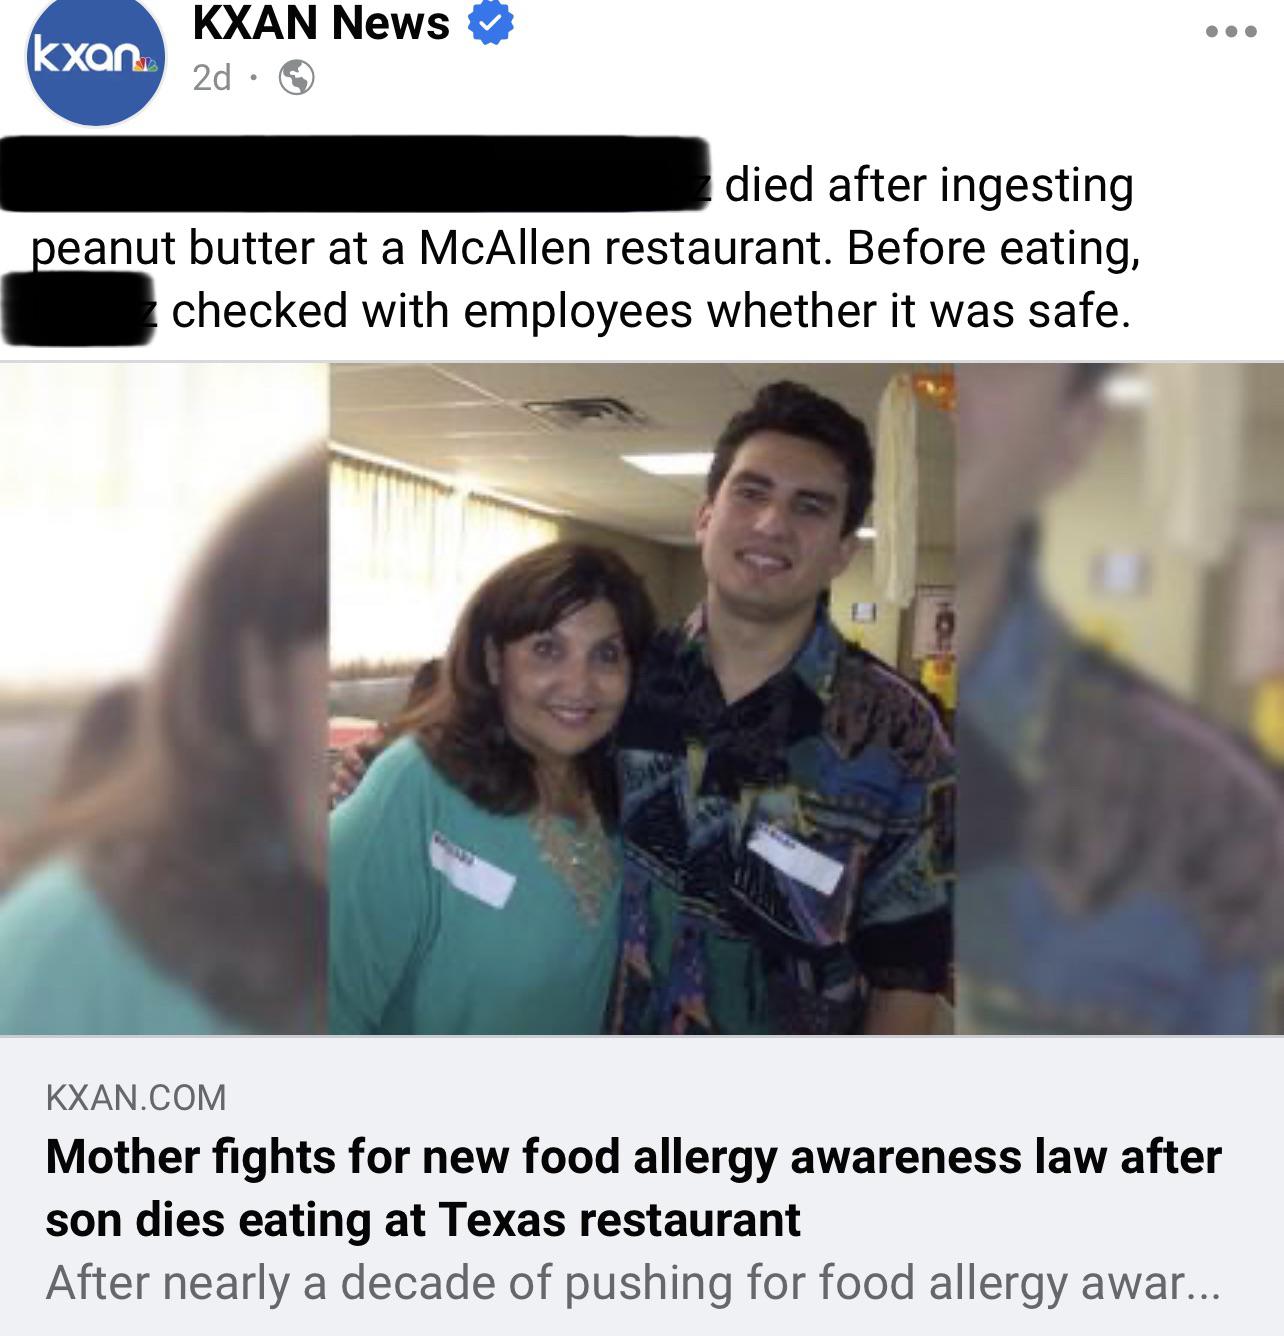 trashy people - presentation - kxan Kxan News 2d. died after ingesting peanut butter at a McAllen restaurant. Before eating, checked with employees whether it was safe. Kxan.Com Mother fights for new food allergy awareness law after son dies eating at Tex